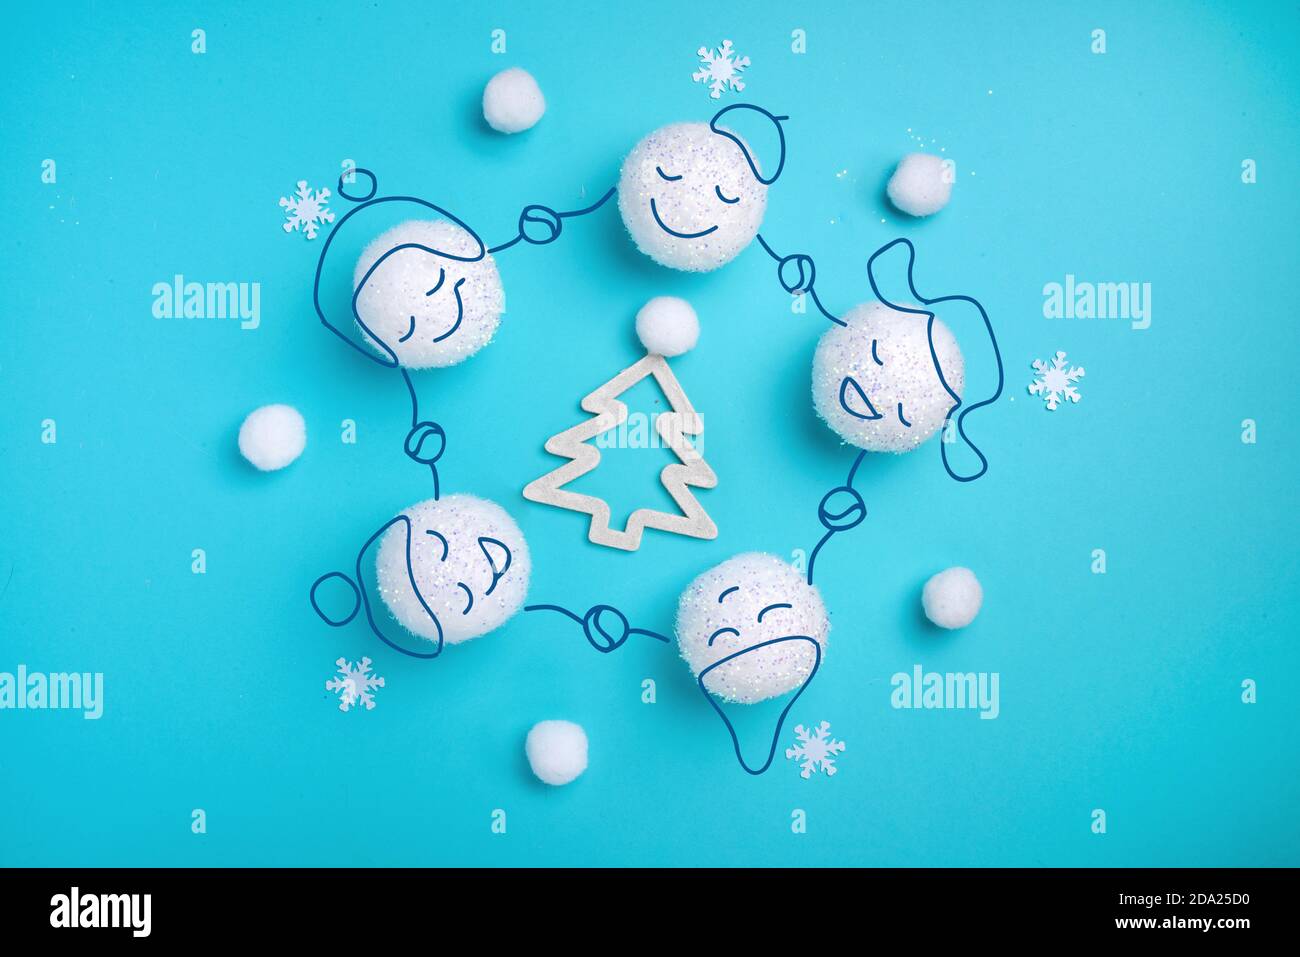 Christmas composition, fir tree in a circle of white balls, round dance concept Stock Photo